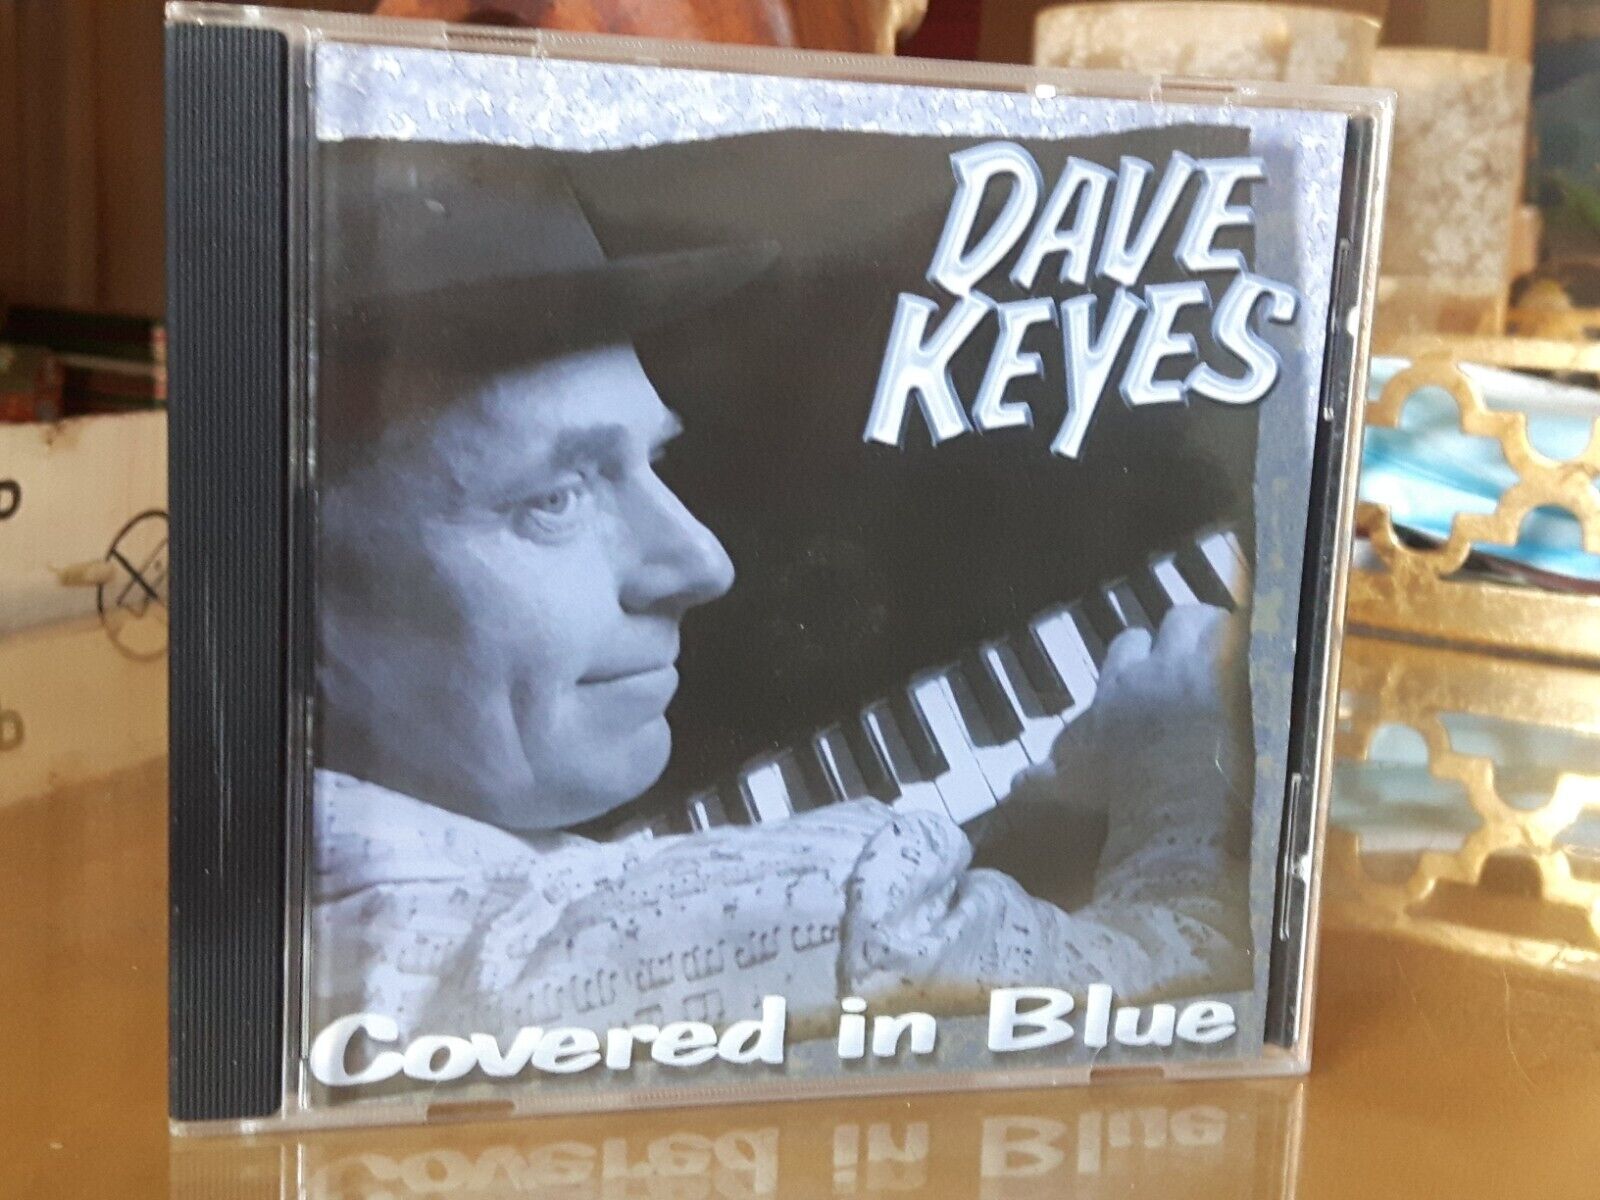 Dave Keyes - Covered in Blue. 2001. USA. Self Released. Excellent Condition. OOP